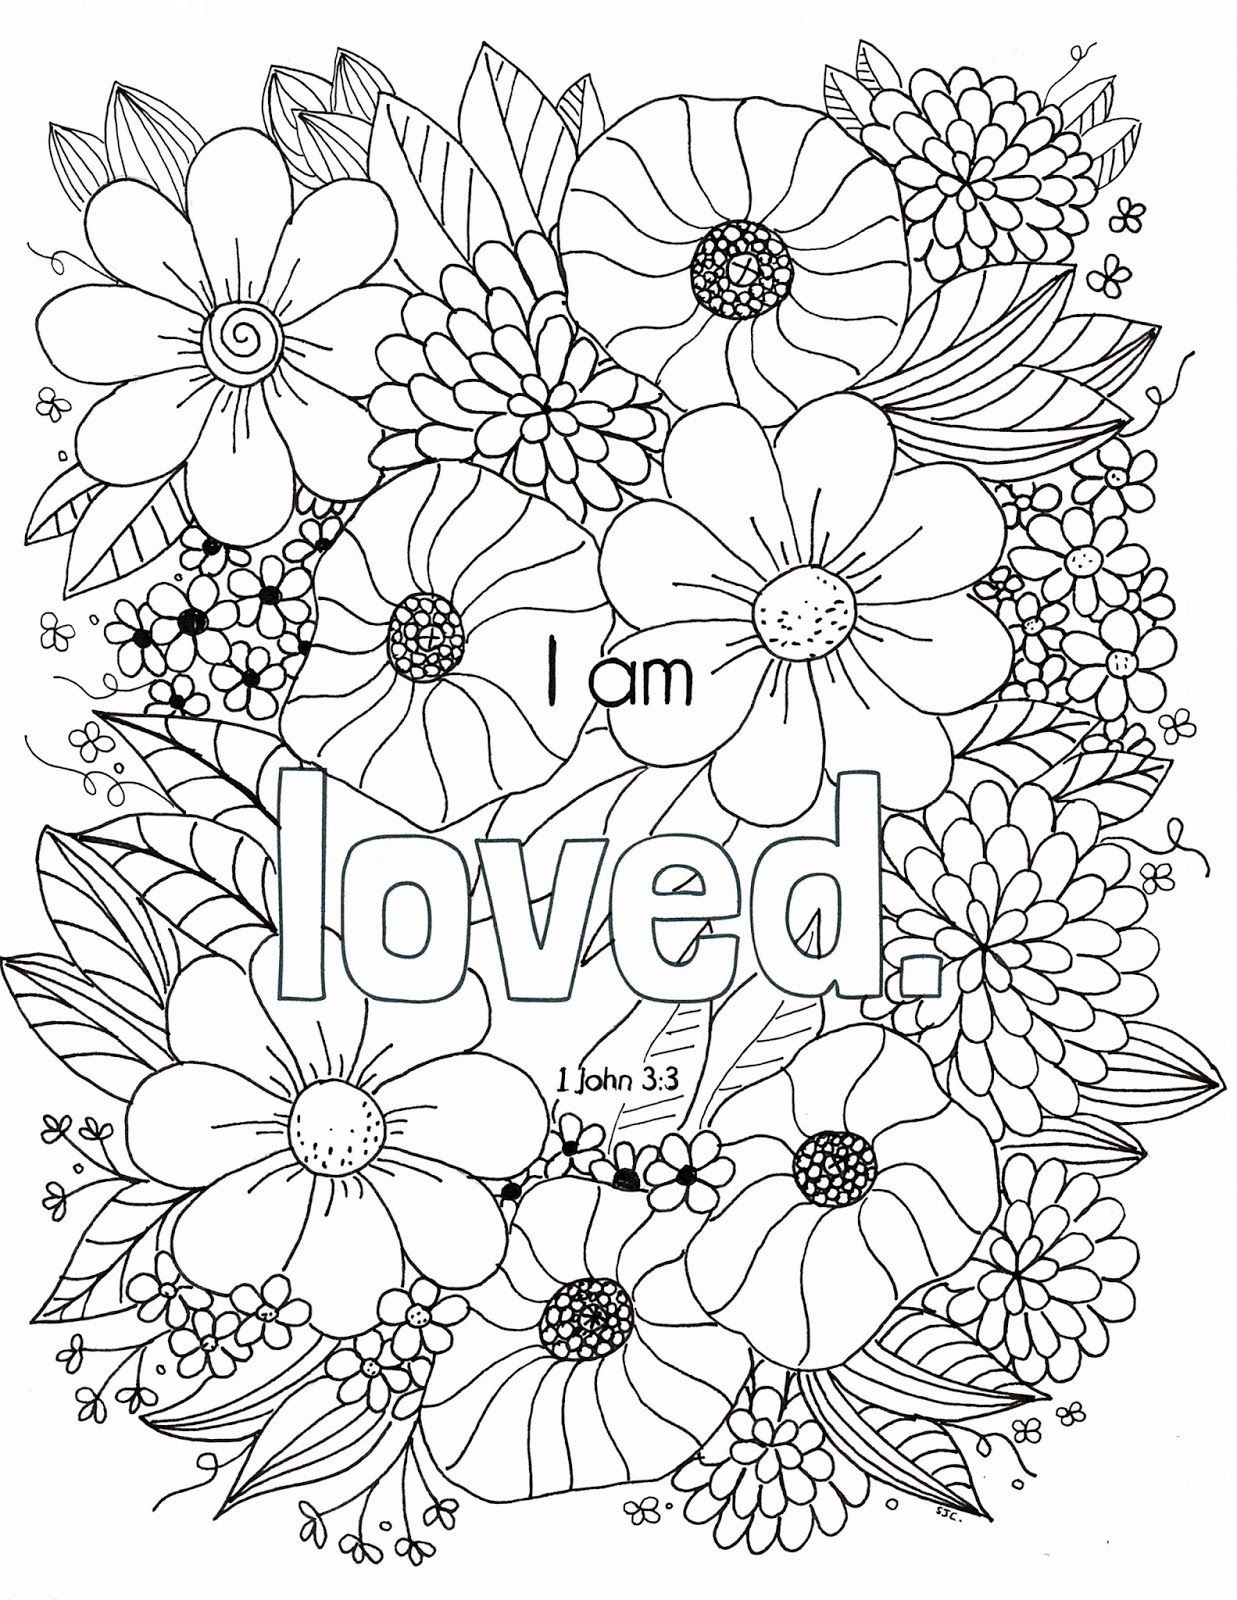 Bible Coloring Pages For Adults
 Wel e to the “Who I am In Christ” Coloring Page Series